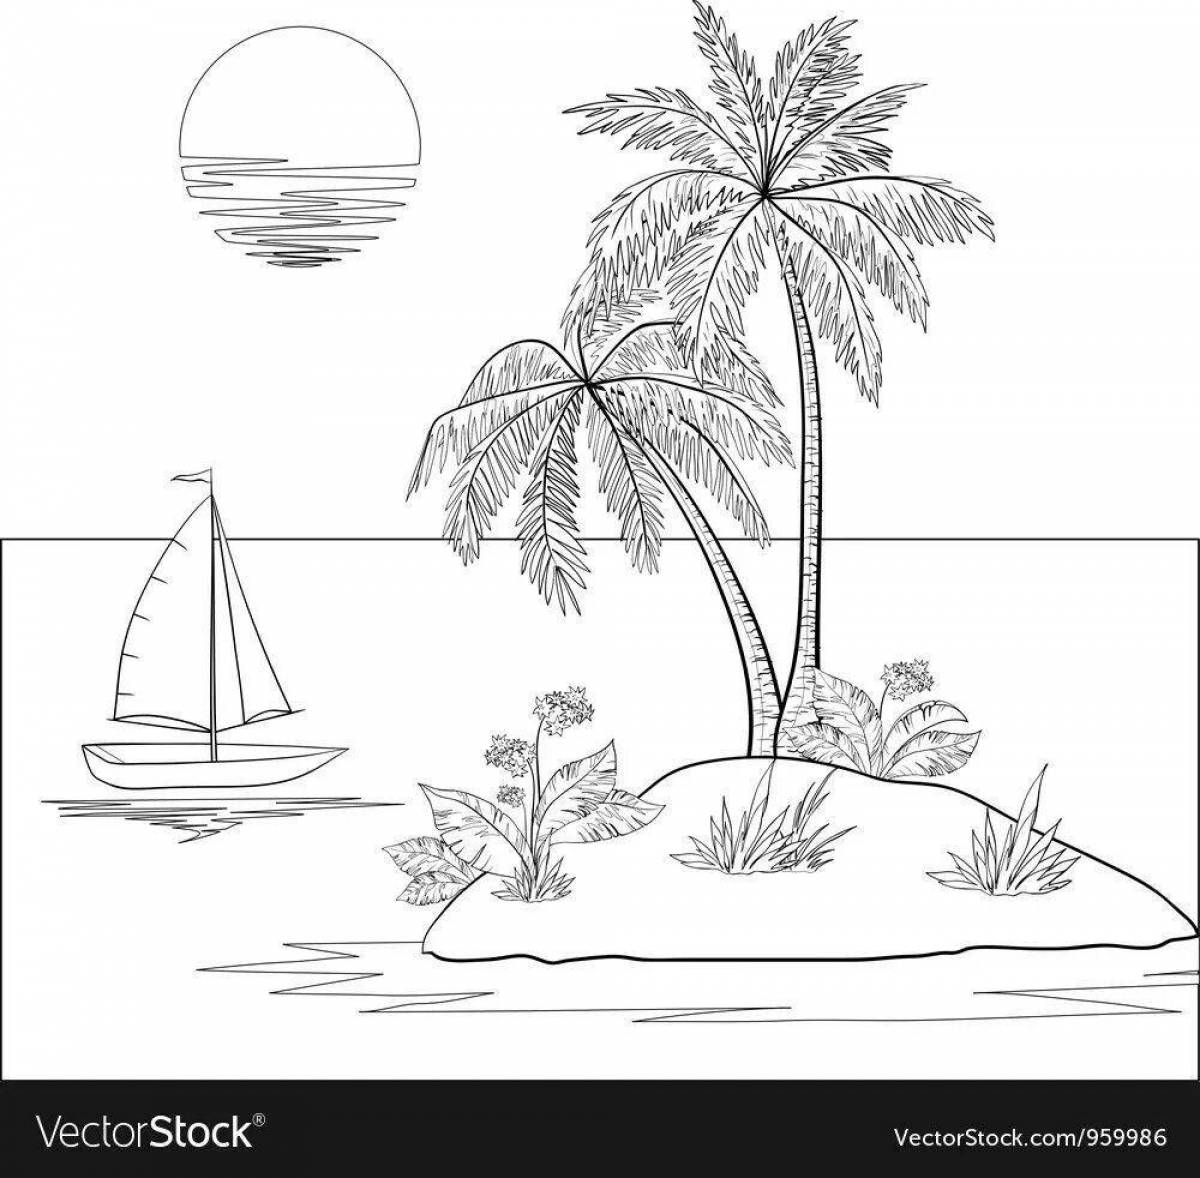 Vibrant desert island coloring page